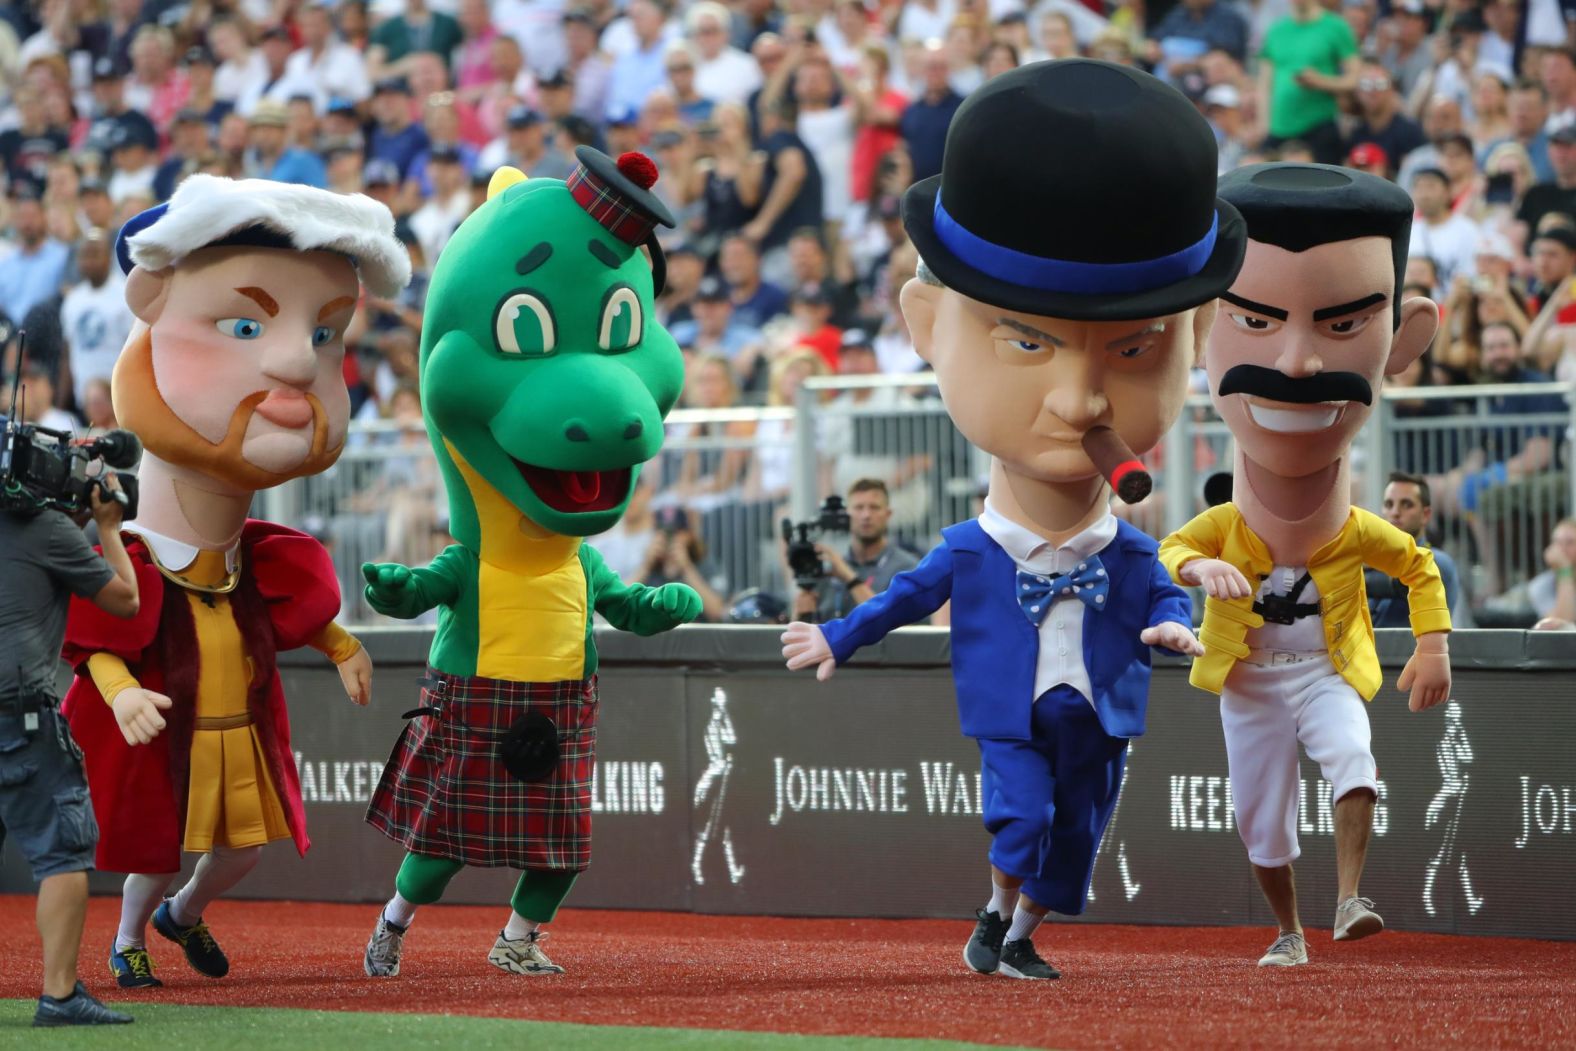 From left, giant mascots King Henry VIII, the Loch Ness Monster, Winston Churchill and Freddie Mercury race around the warning track at the end of the fourth inning of game one of the MLB London series on June 29.